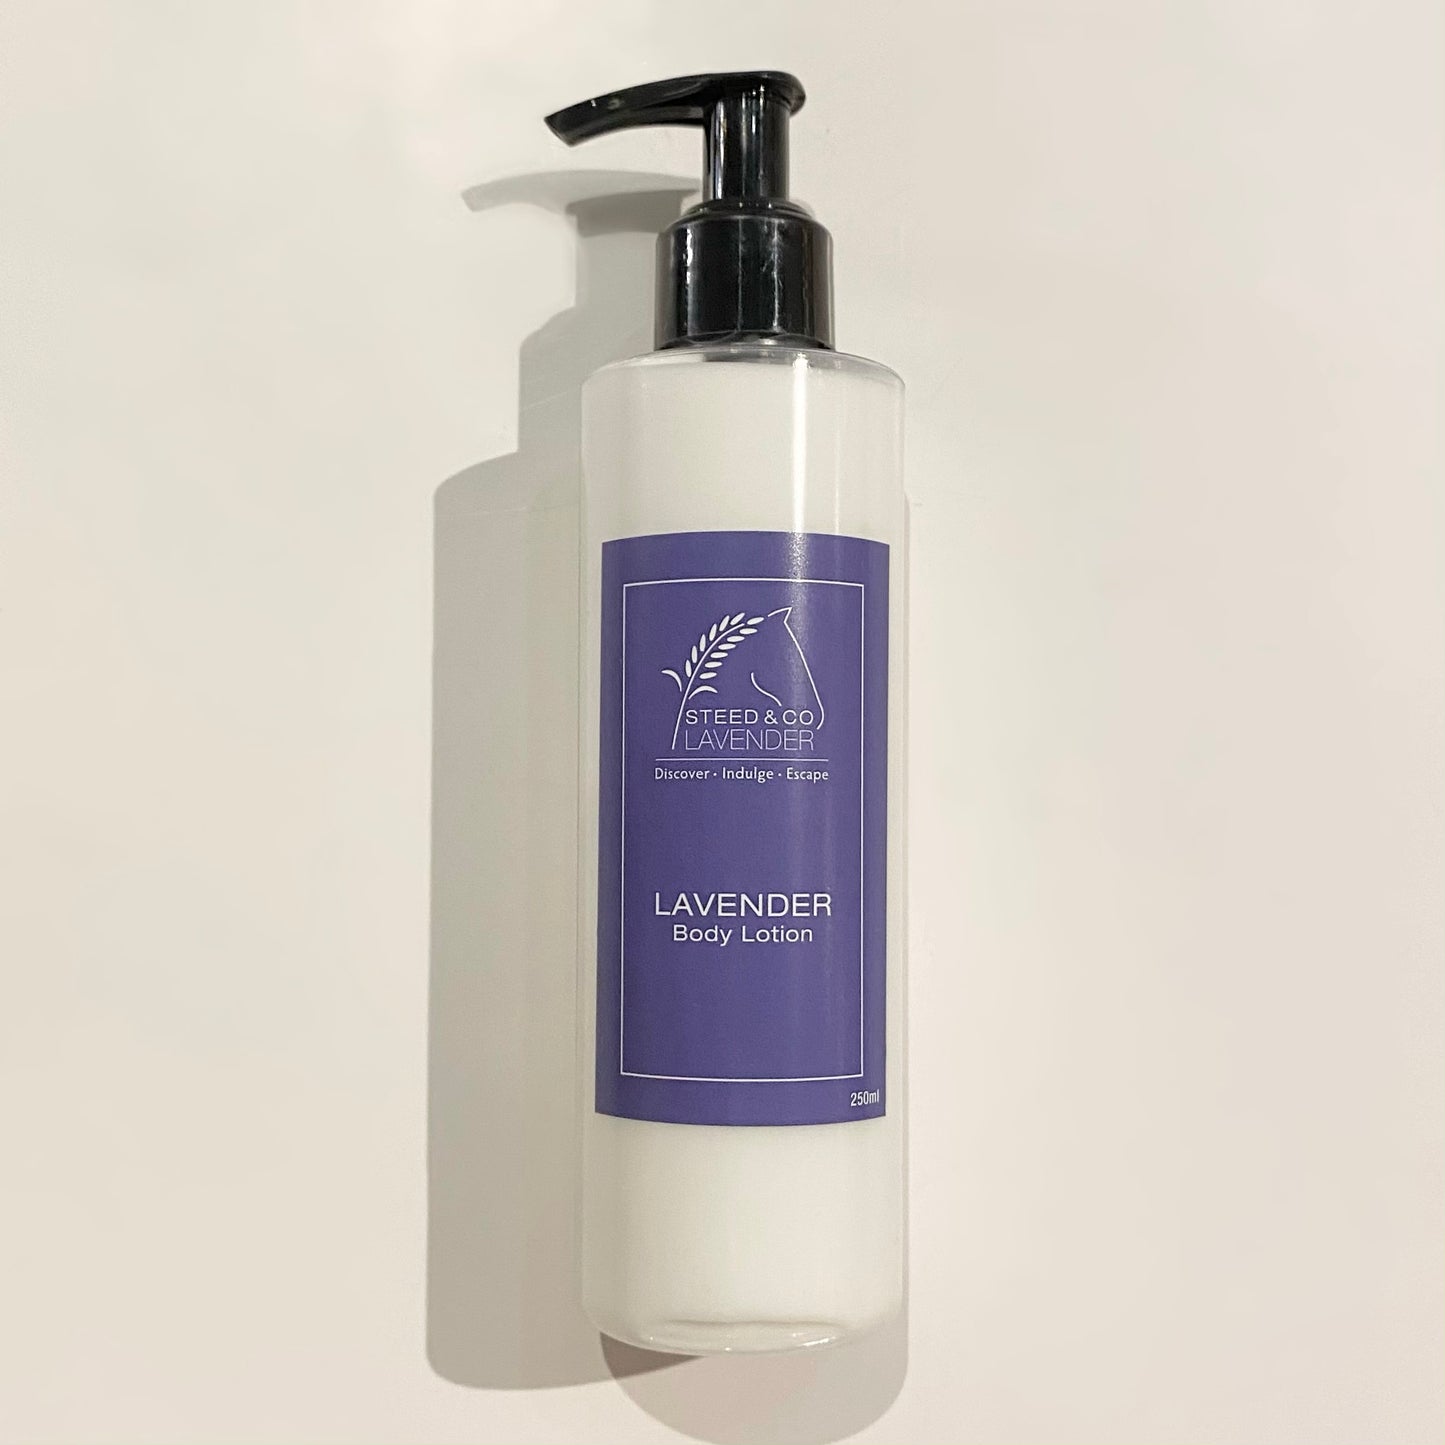 Steed & Co Lavender Body Lotion